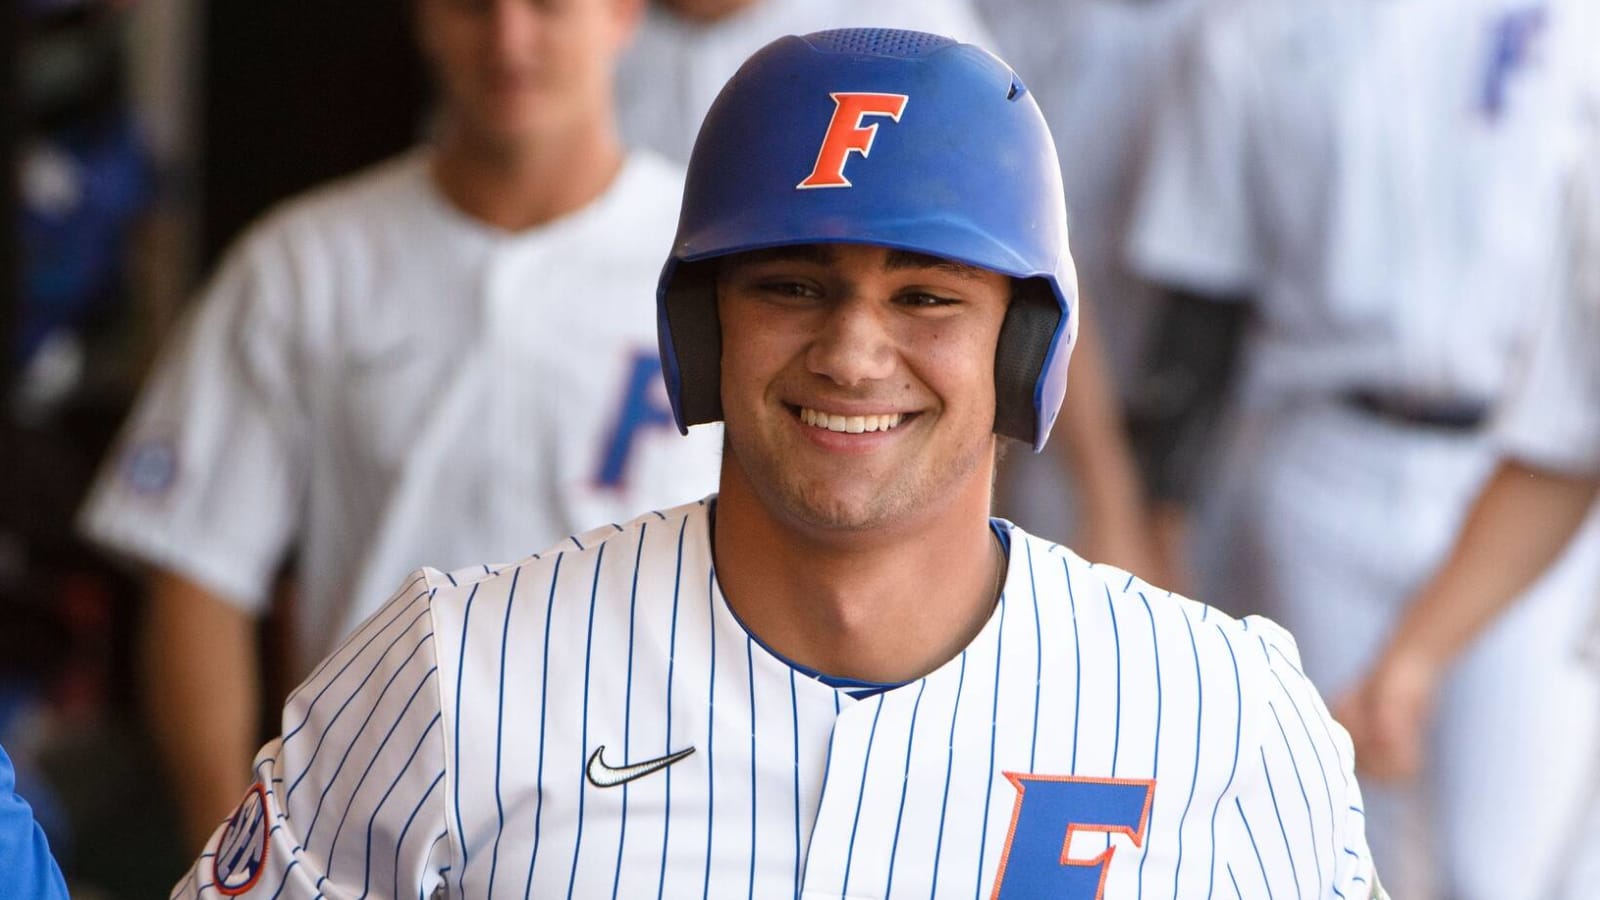 Florida player had most unbelievable celebration after his grand slam